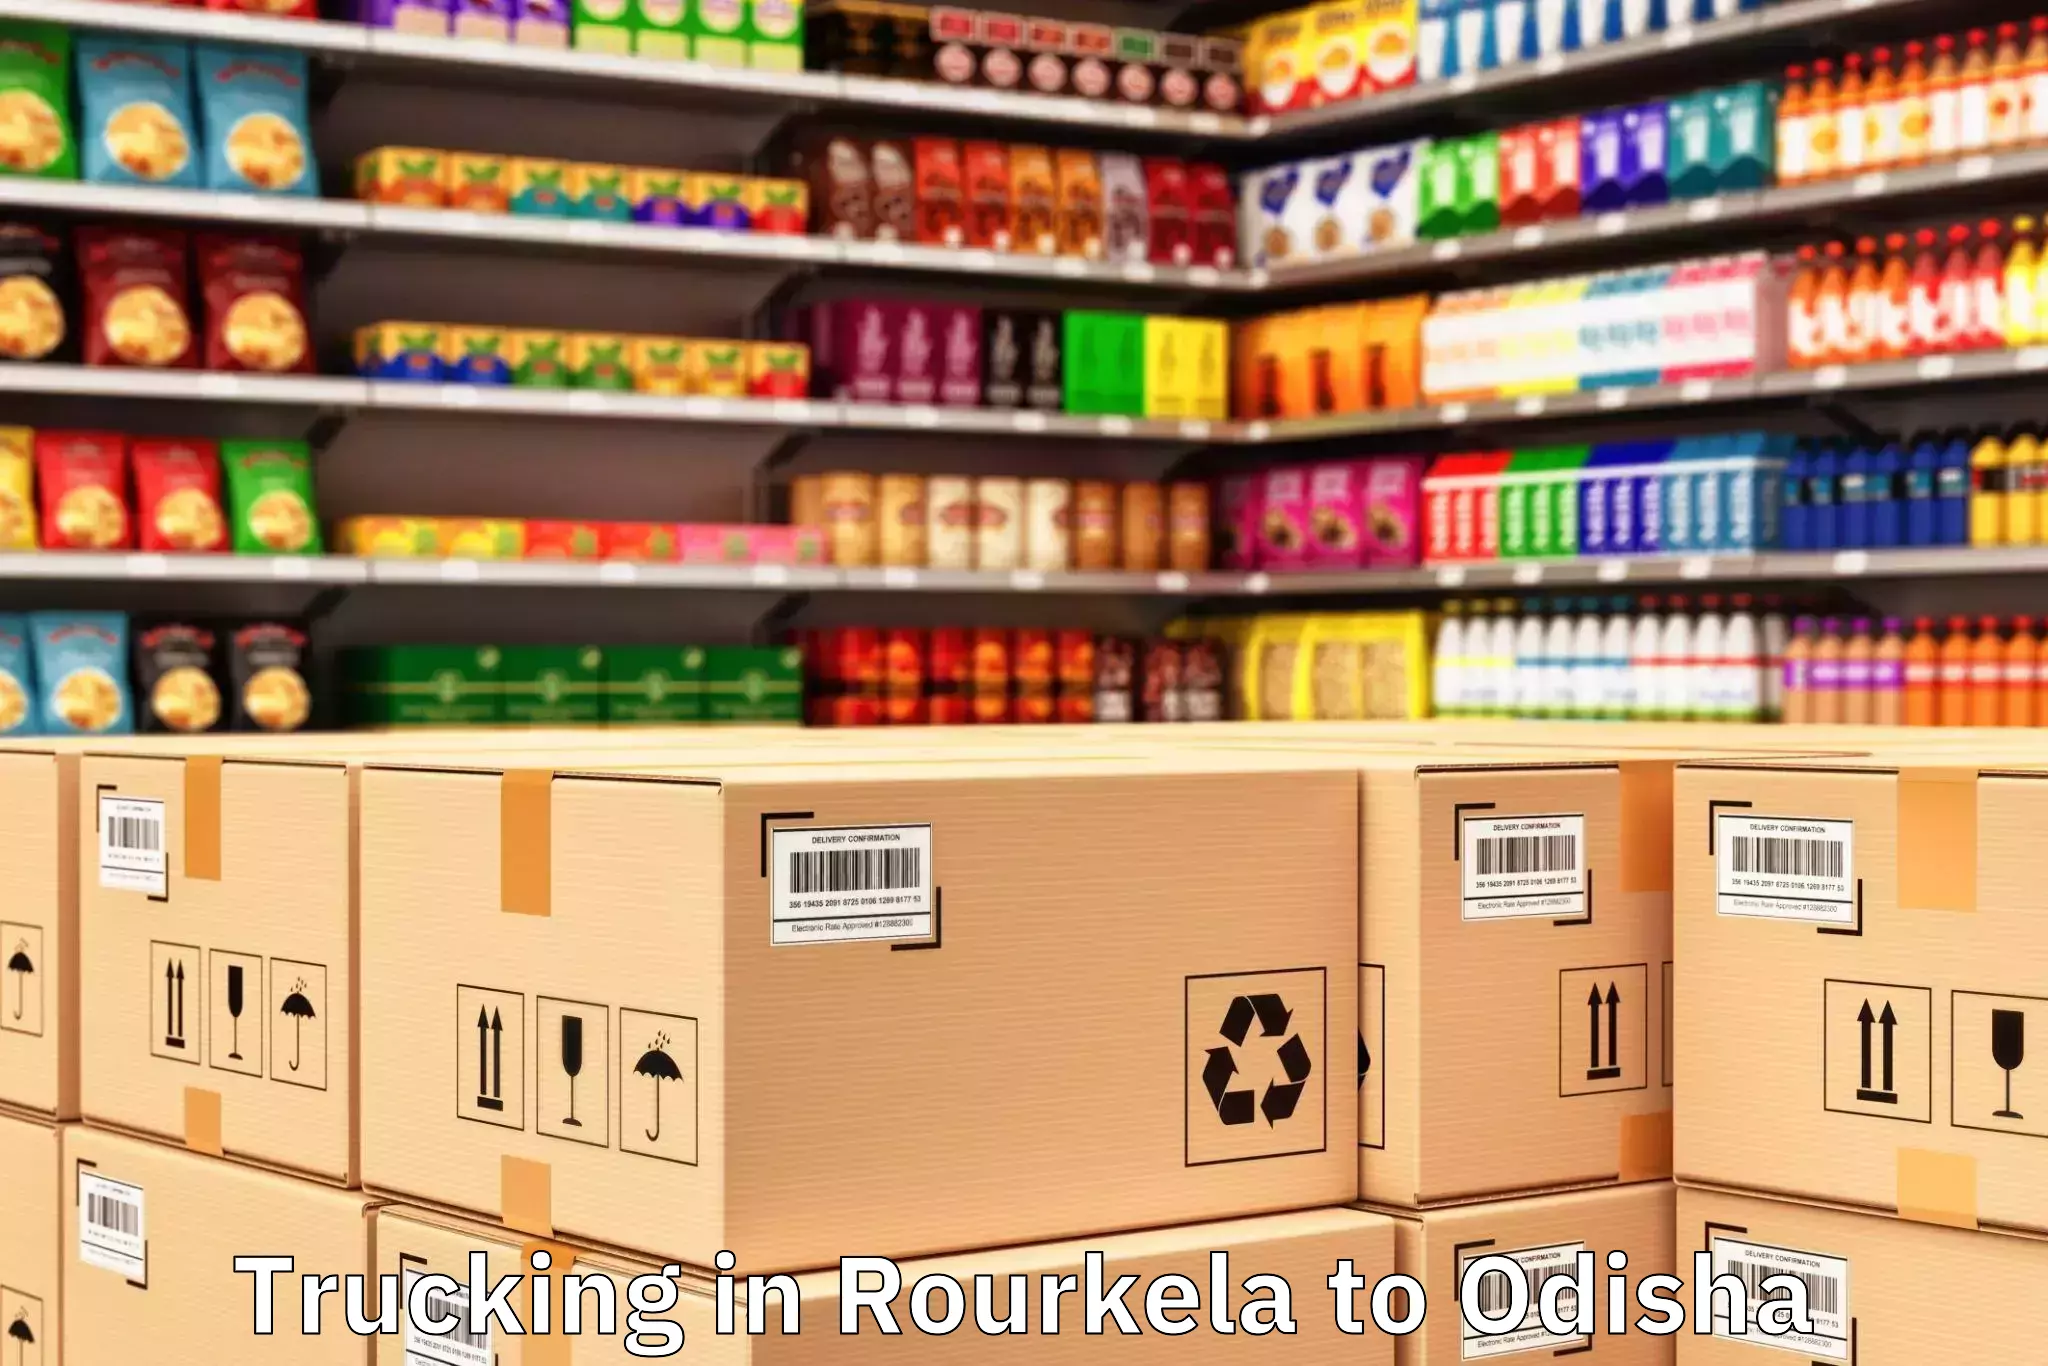 Rourkela to Sgbl Square Mall Trucking Booking